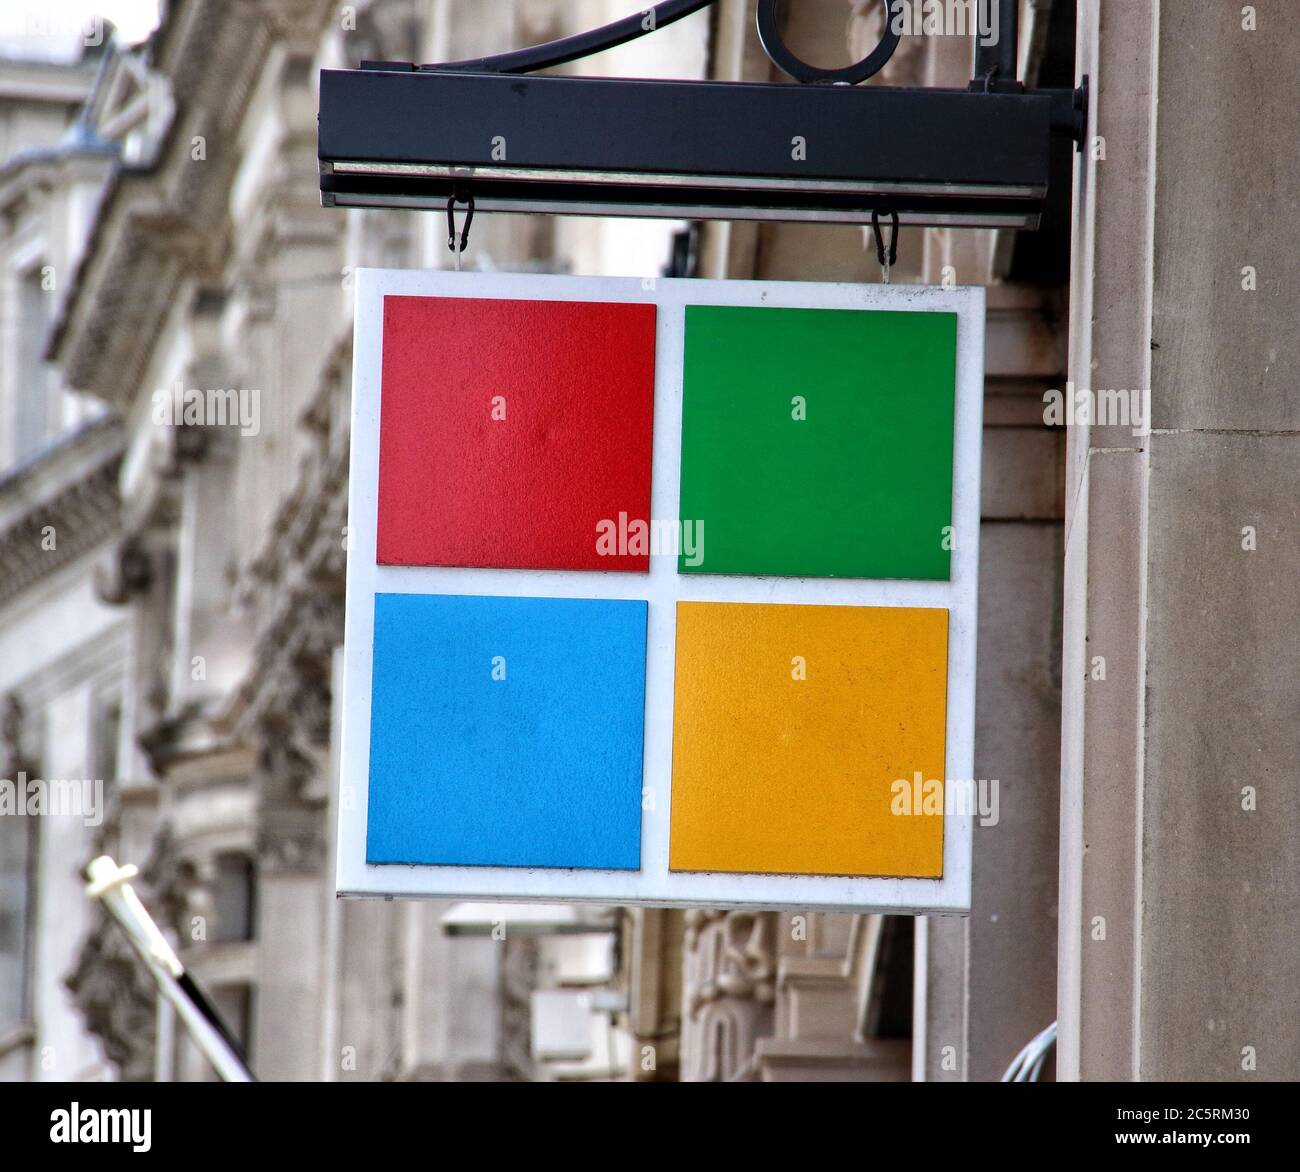 London, UK. 03rd July, 2020. Microsoft logo seen at one of their  stores.Microsoft has said it will keep all of its retail locations closed  permanently, including London's Flagship store in Oxford Circus